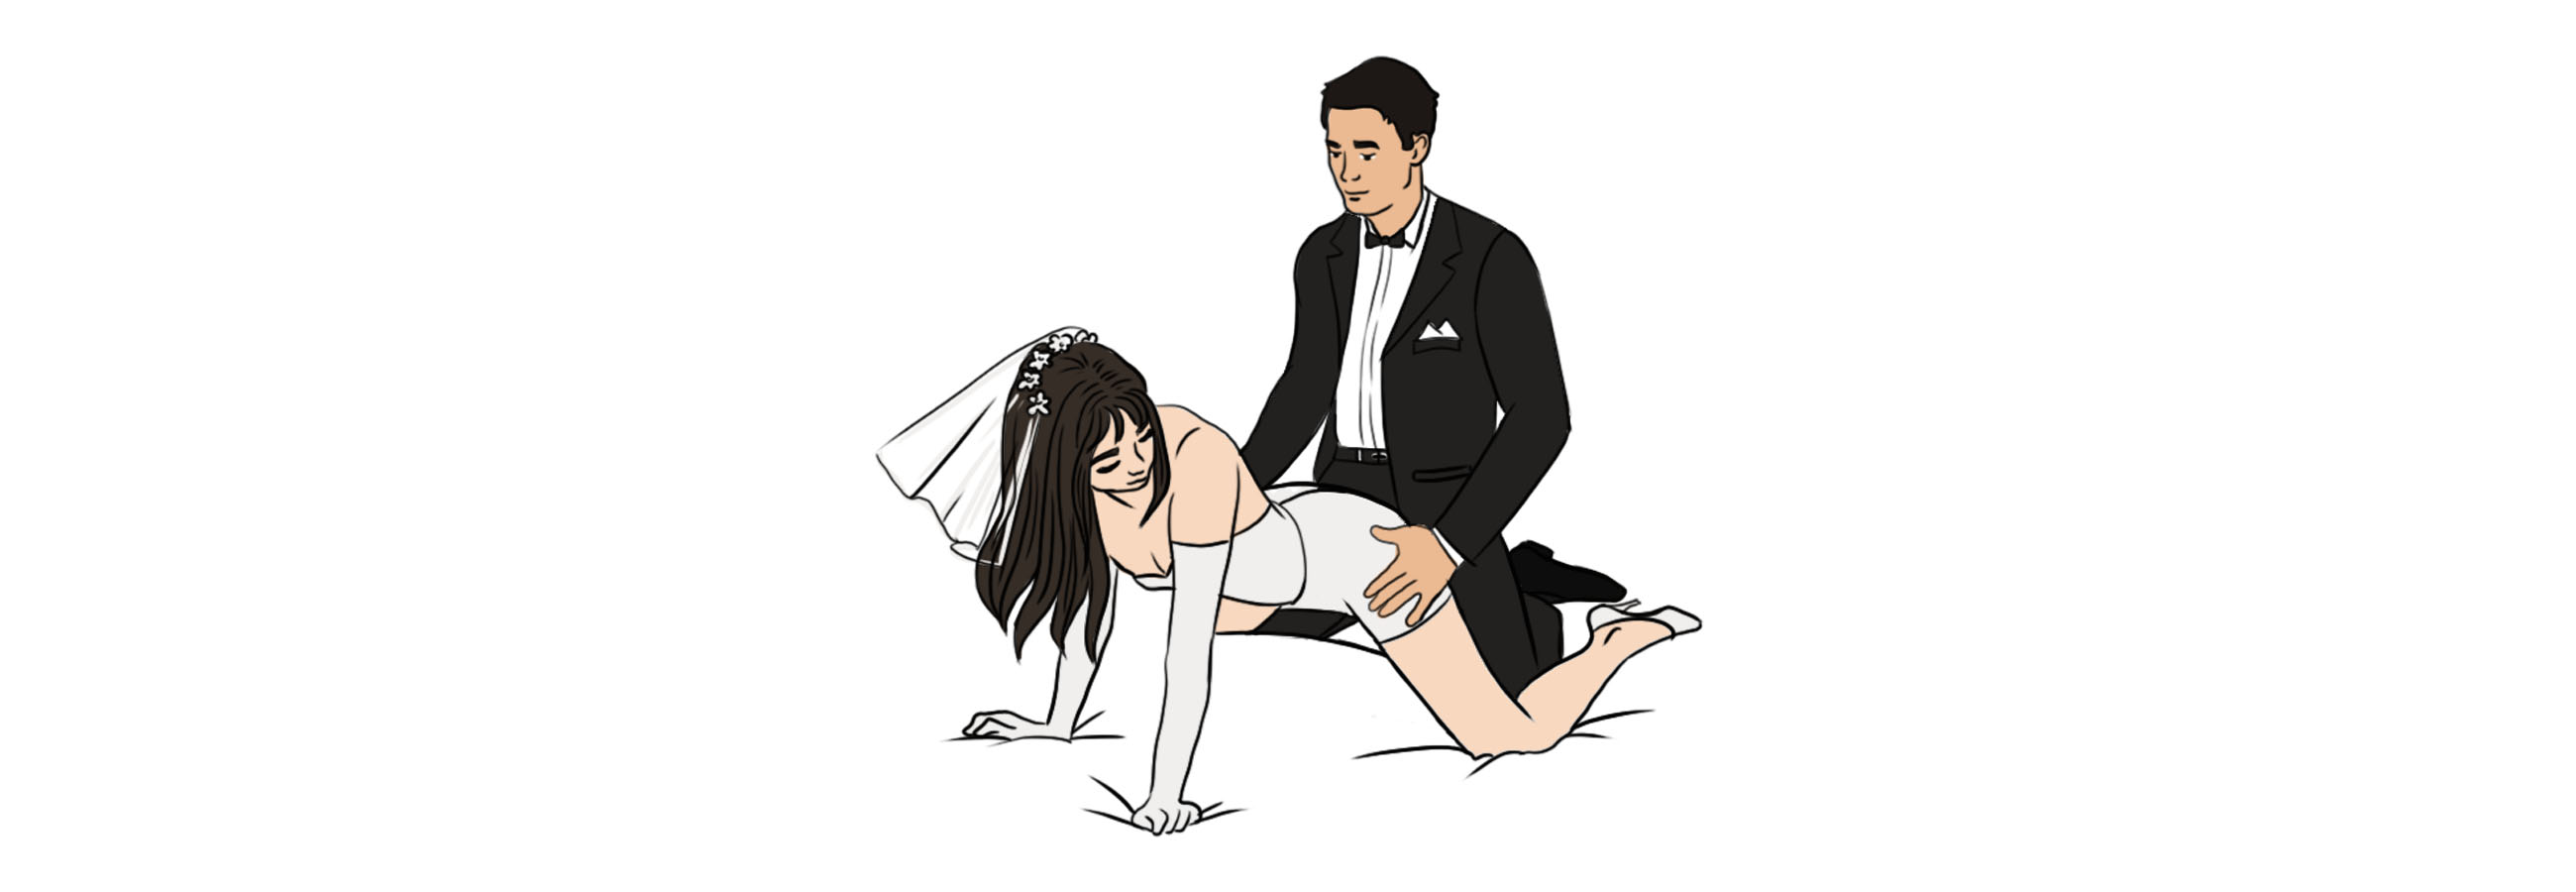 erotic images for married couples